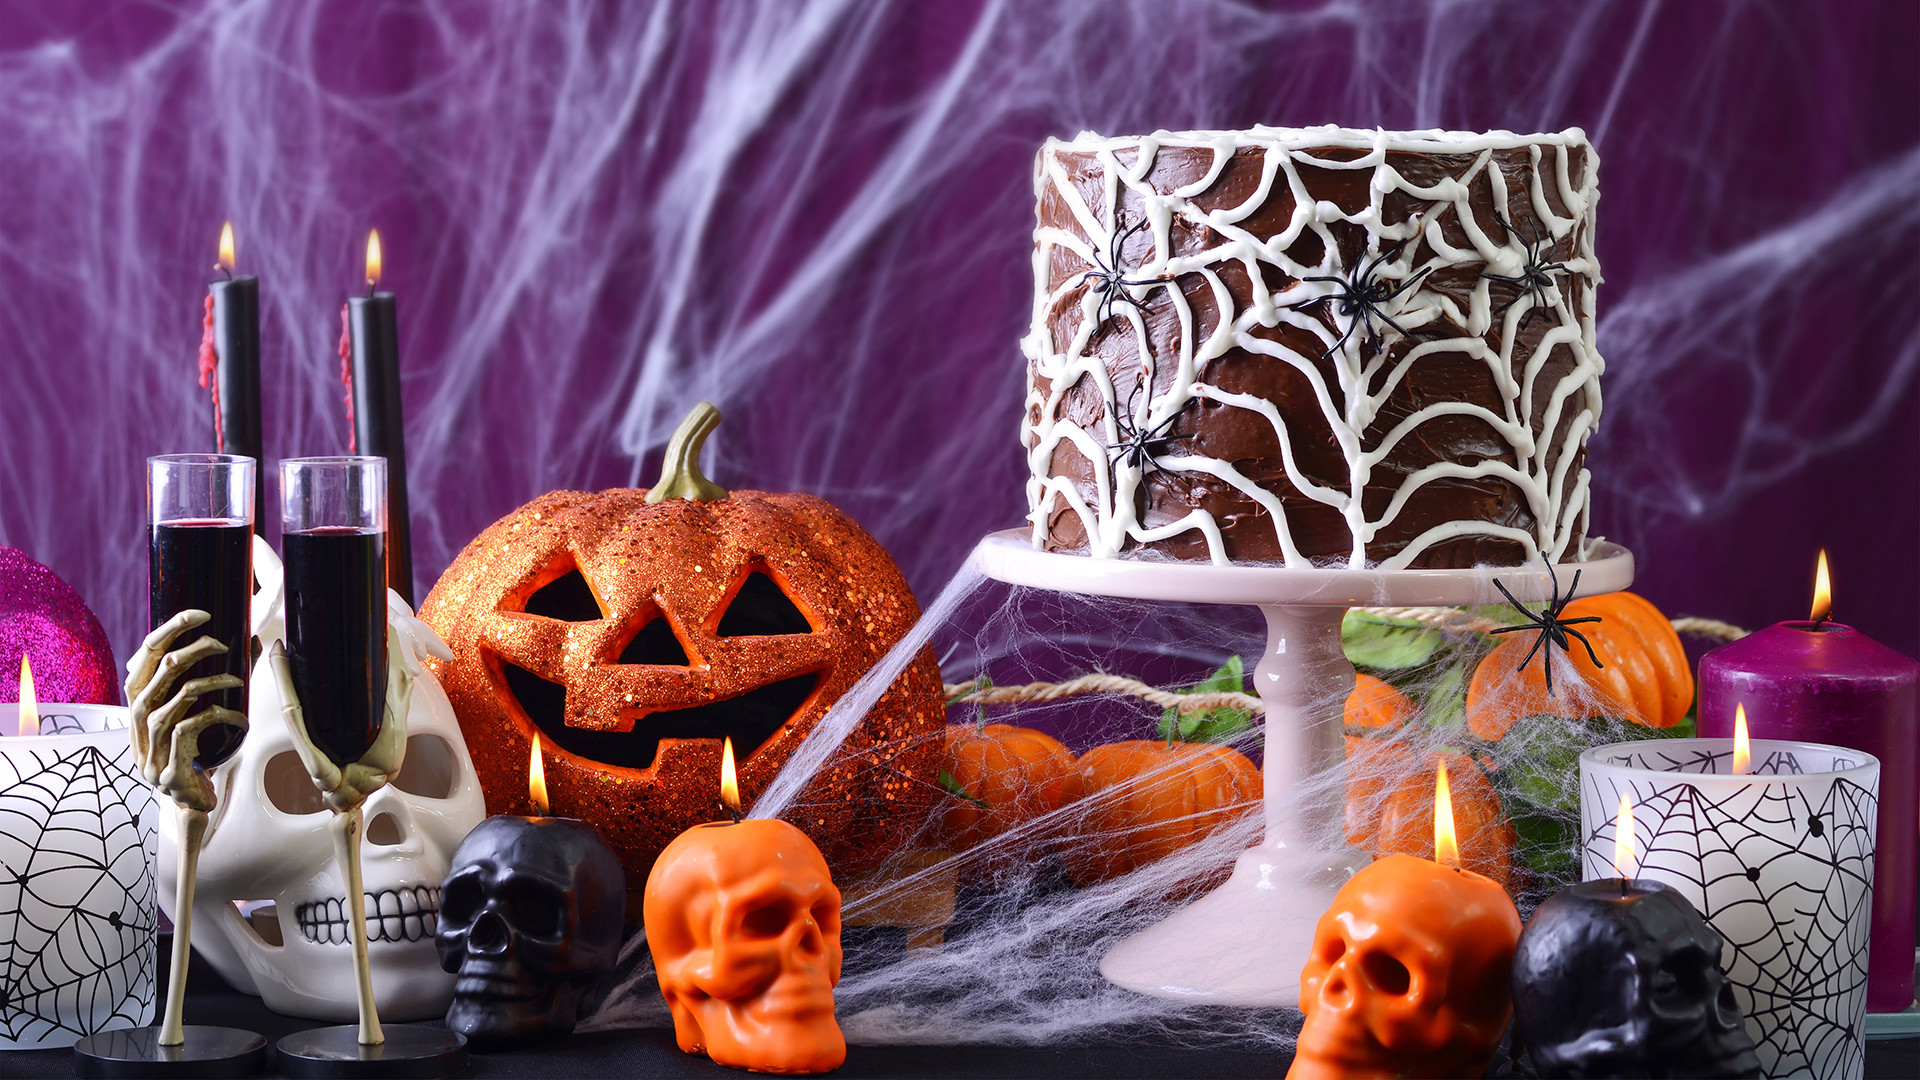 Halloween Decorating Party Ideas
 Easy DIY decorations for your Halloween party TODAY